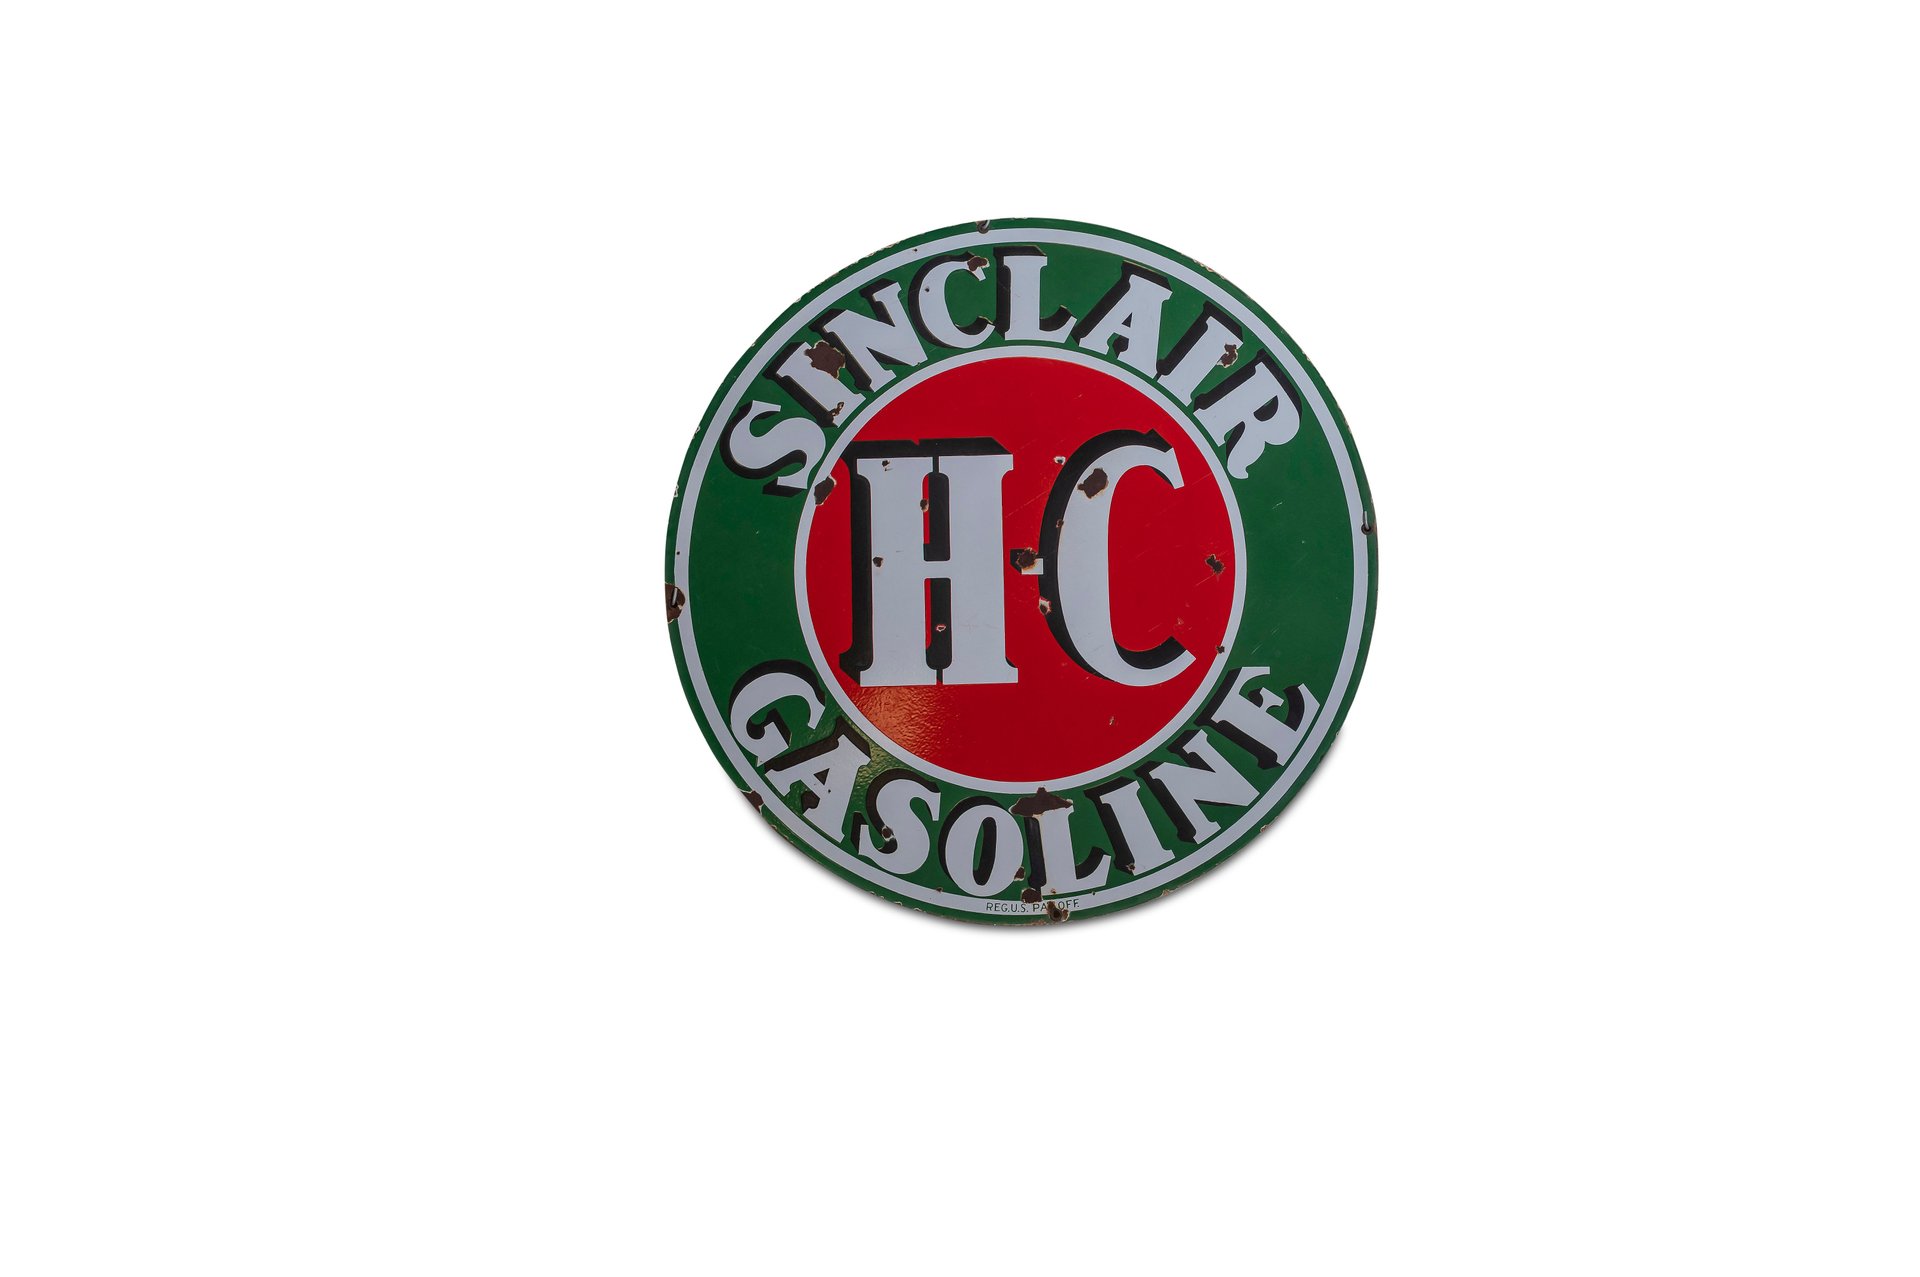 For Sale 'Sinclair Gasoline' Porcelain Sign, double-Sided